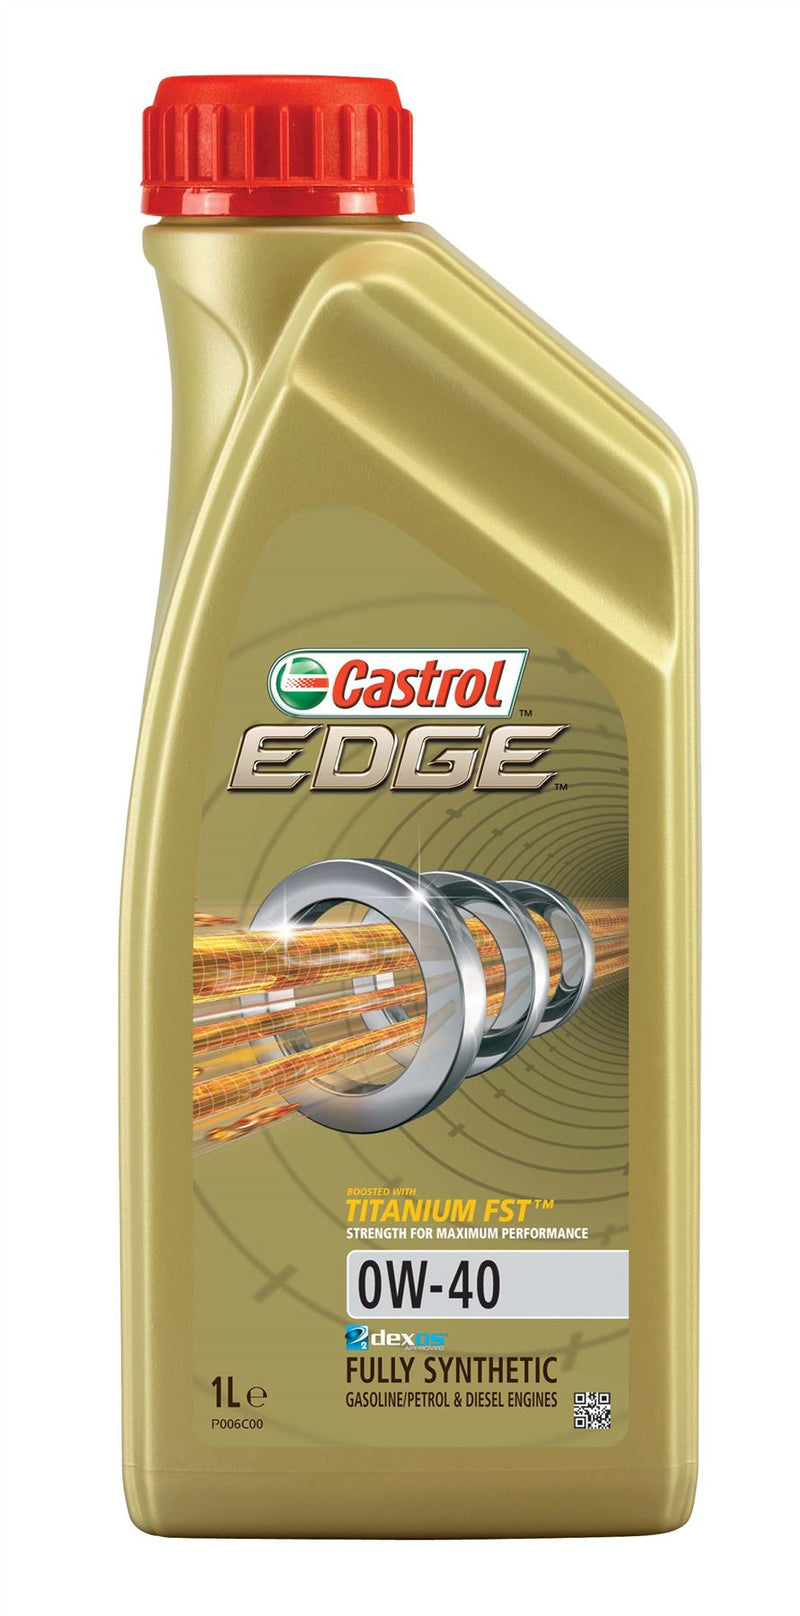 Castrol Edge Titanium 0w-40 FST A3/B4 Fully Synthetic Car Engine Oil - Top Up Pack: 1 litre